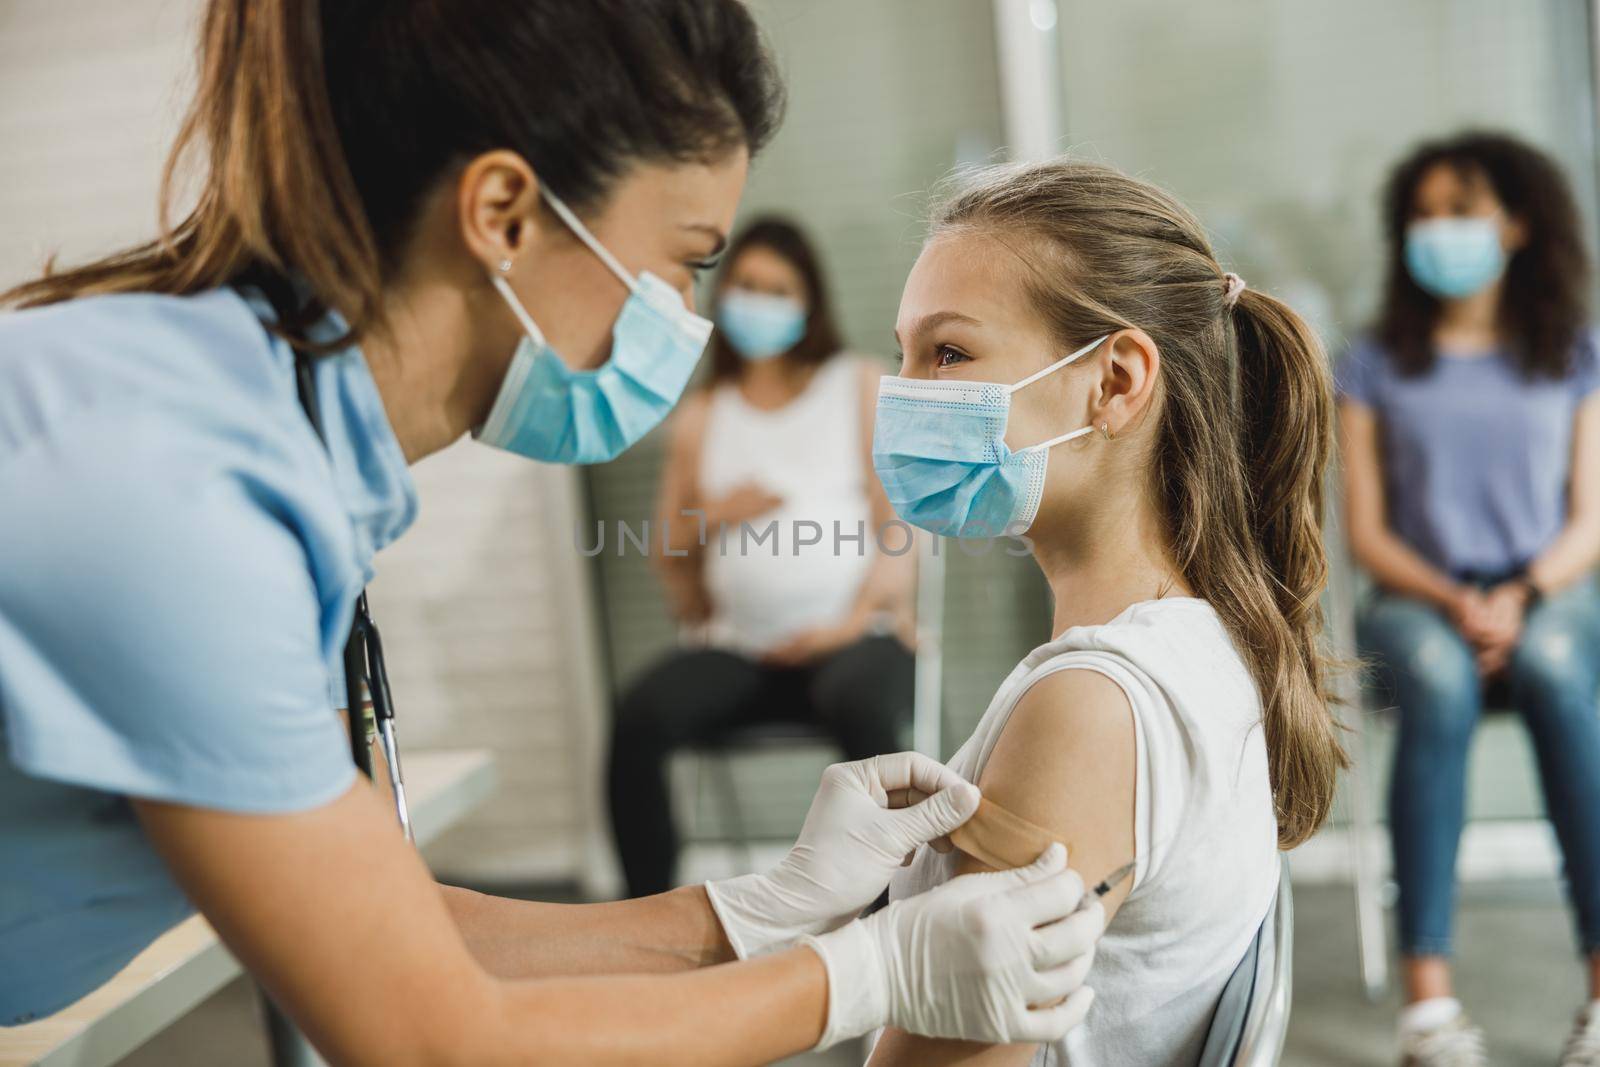 A nurse applying a band aid to a cute teenager girl after receiving the Covid-19 vaccine.